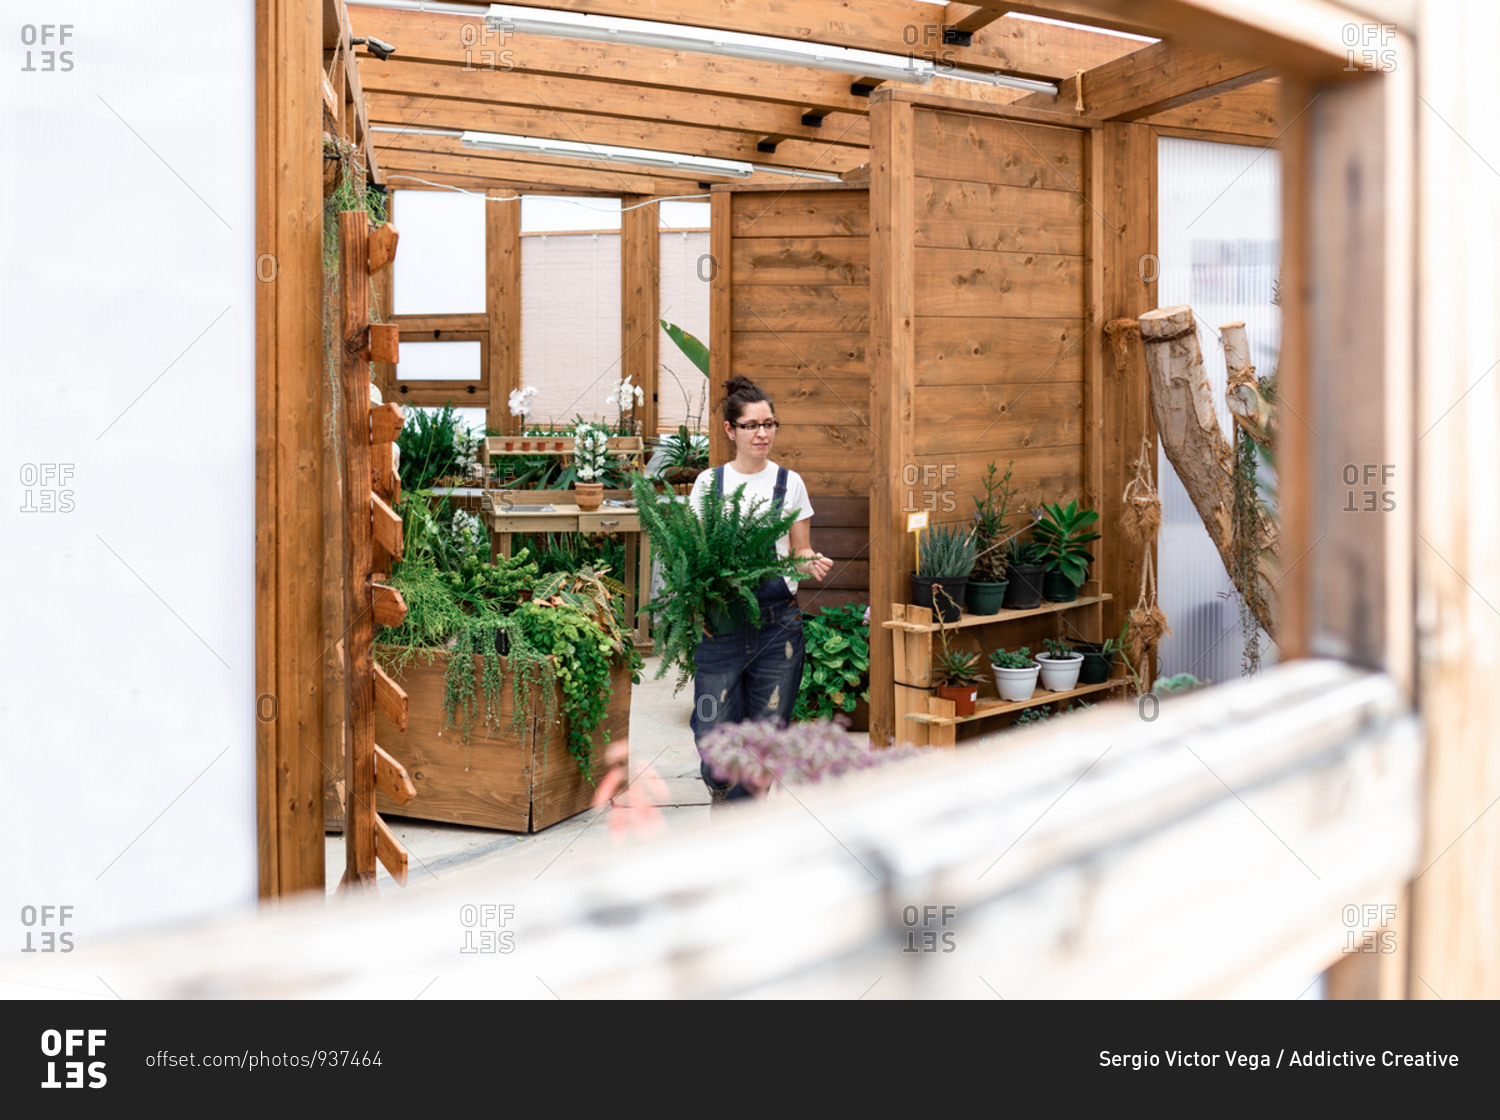 Adult happy woman smiling looking away carrying potted plant while working in wooden greenhouse